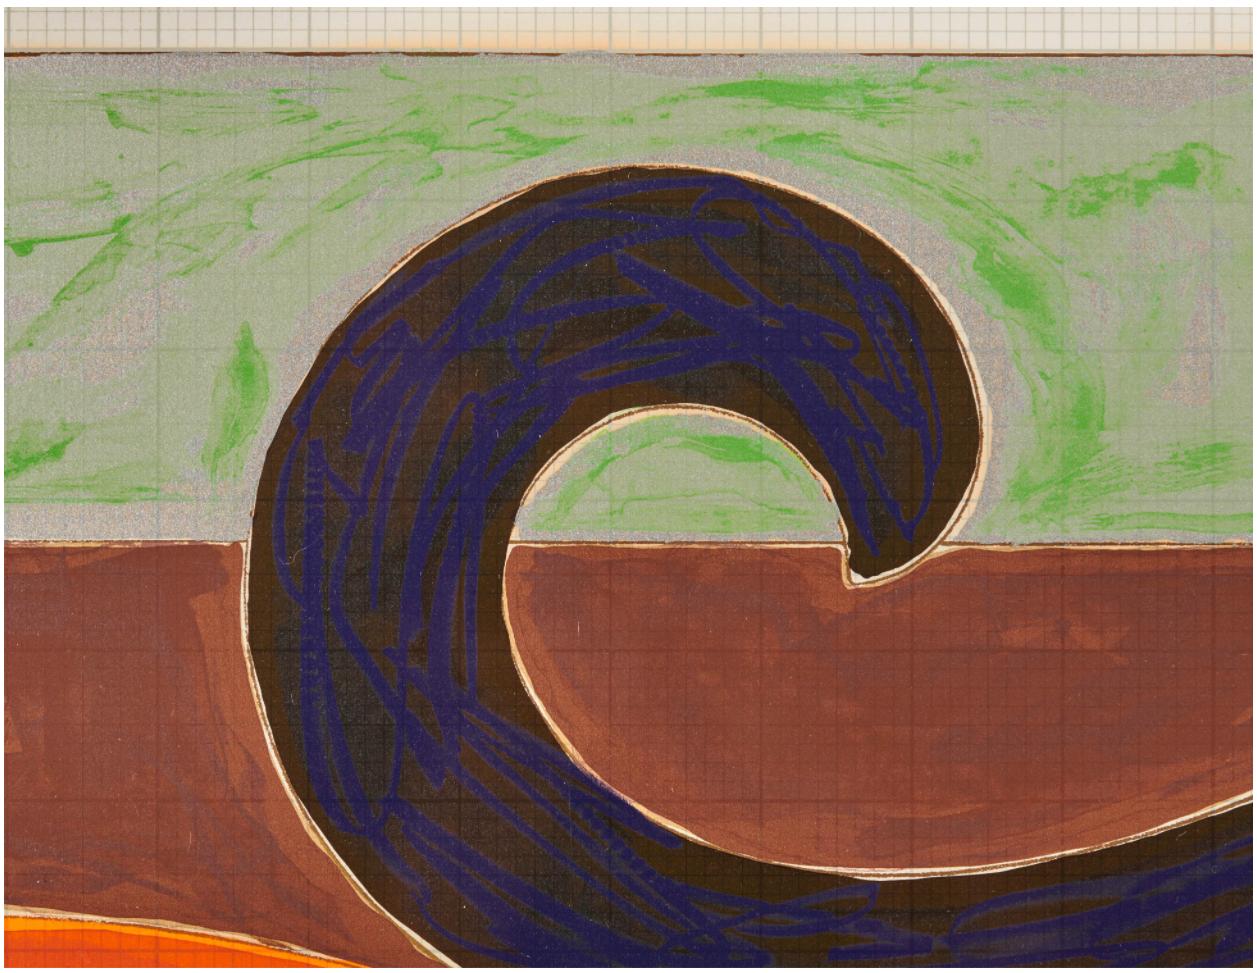 Frank Stella 'Eskimo Curlew' Signed Lithograph and Screenprint 1977 For Sale 2